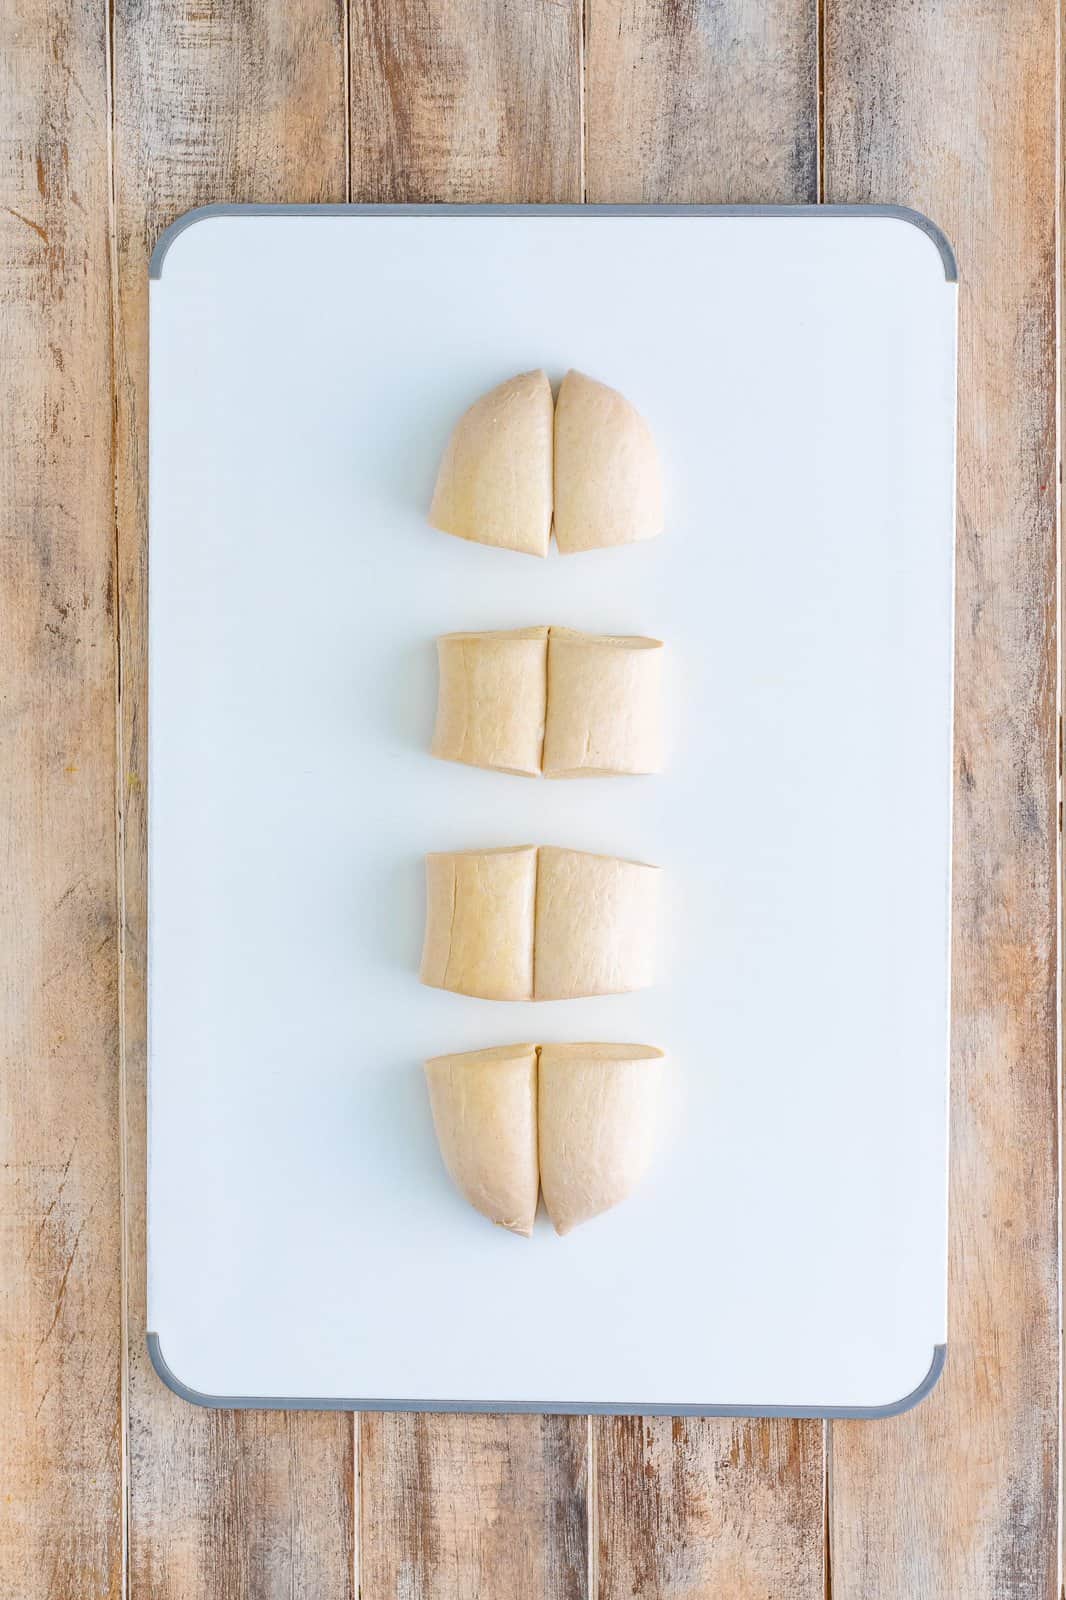 Bread dough cut into 4 pieces with two sections each.